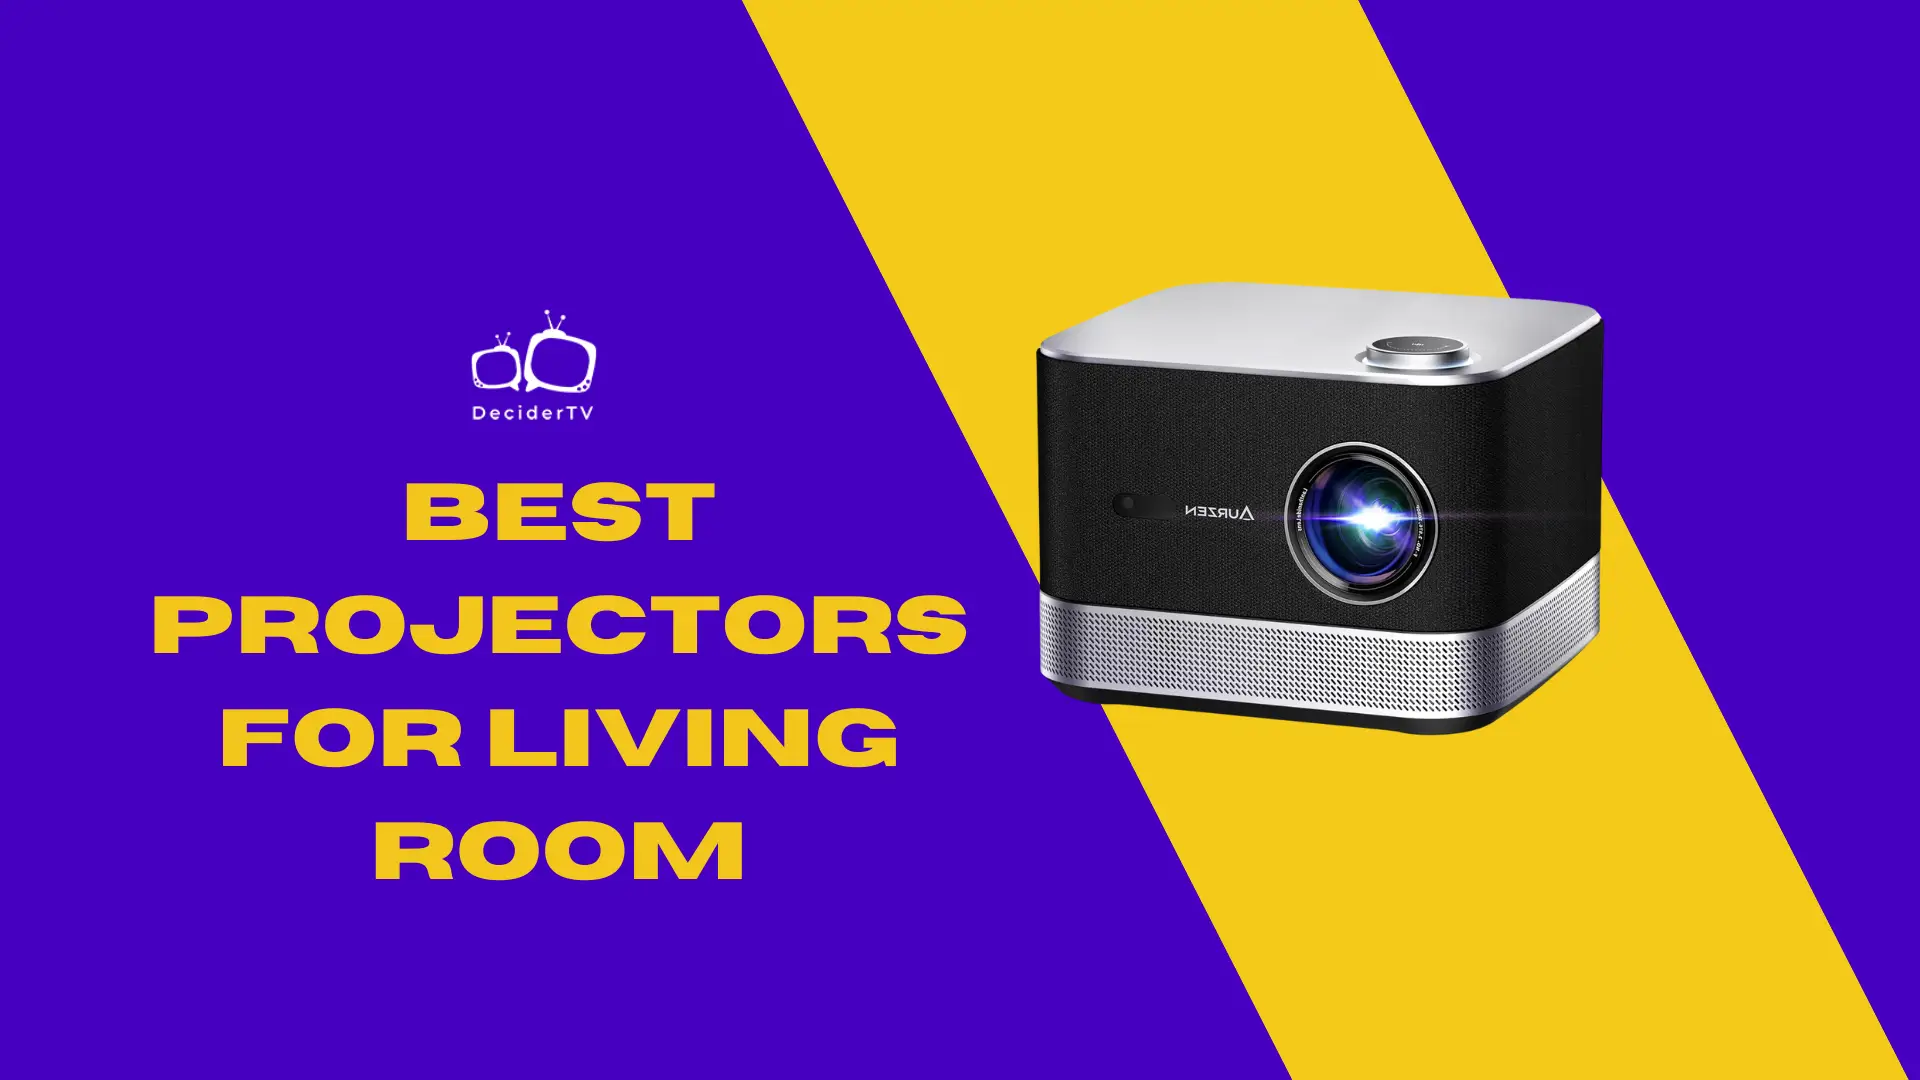 Best Projectors for Living Room